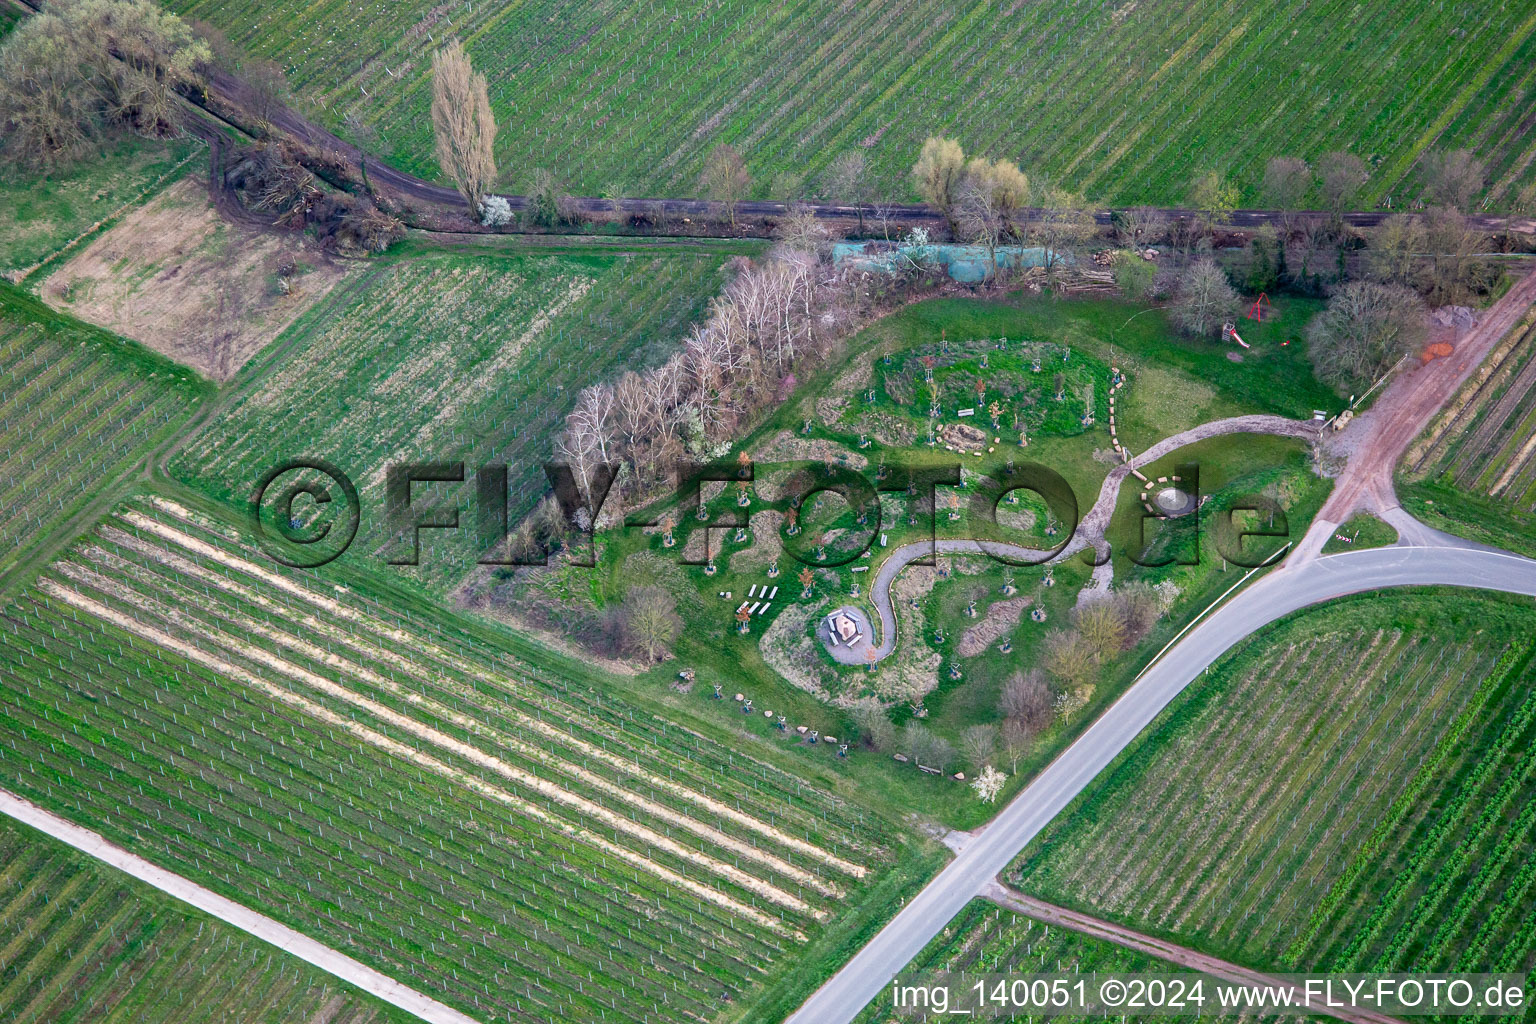 Aerial view of Climate ARBORETUM in spring in Flemlingen in the state Rhineland-Palatinate, Germany